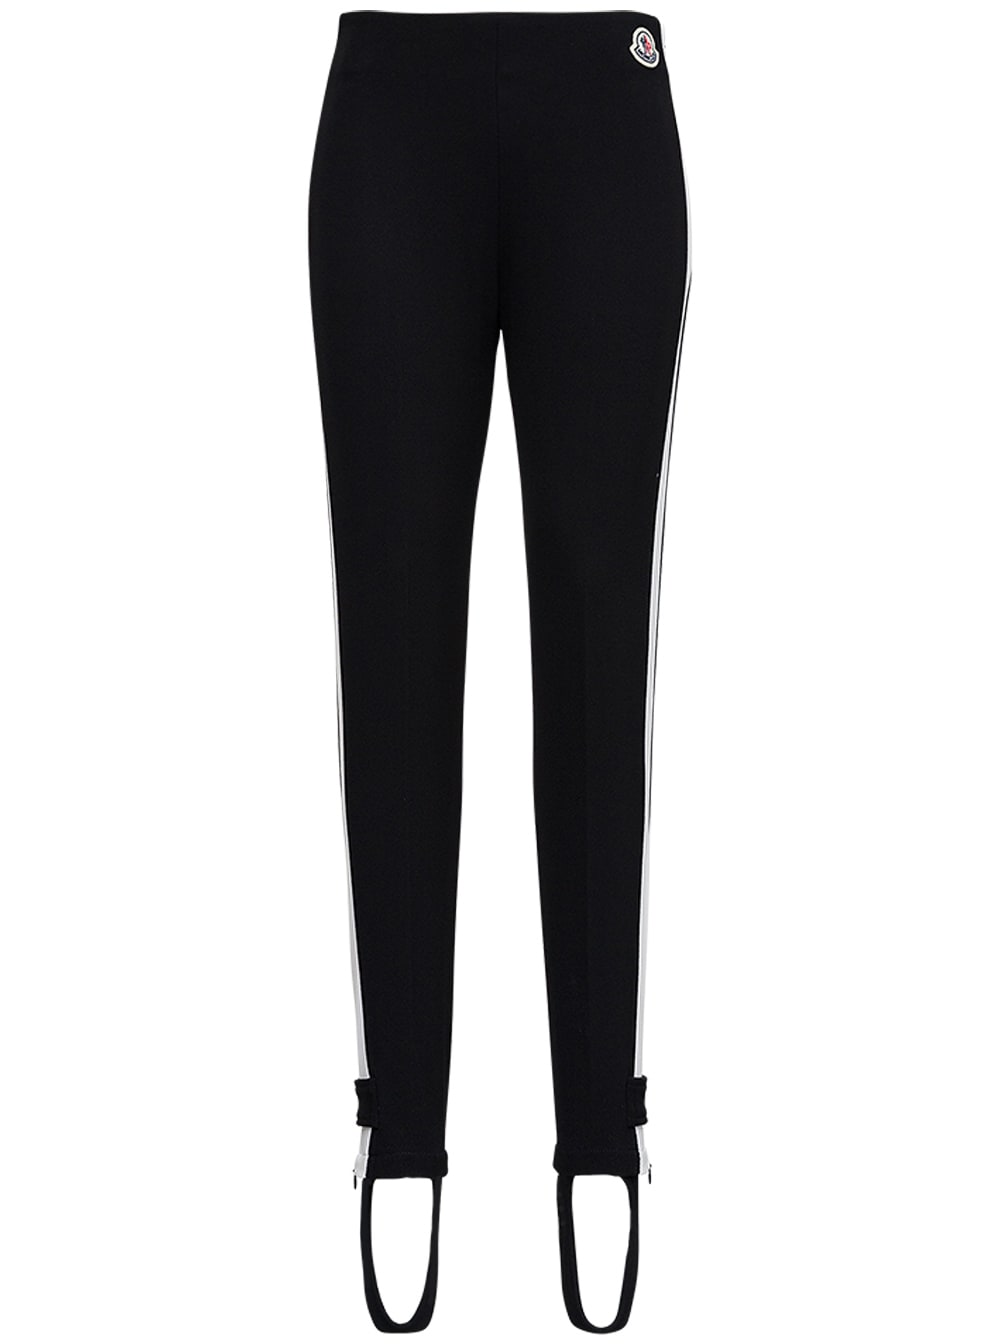 Moncler Black Stretch Fabric Leggings With Logo Patch